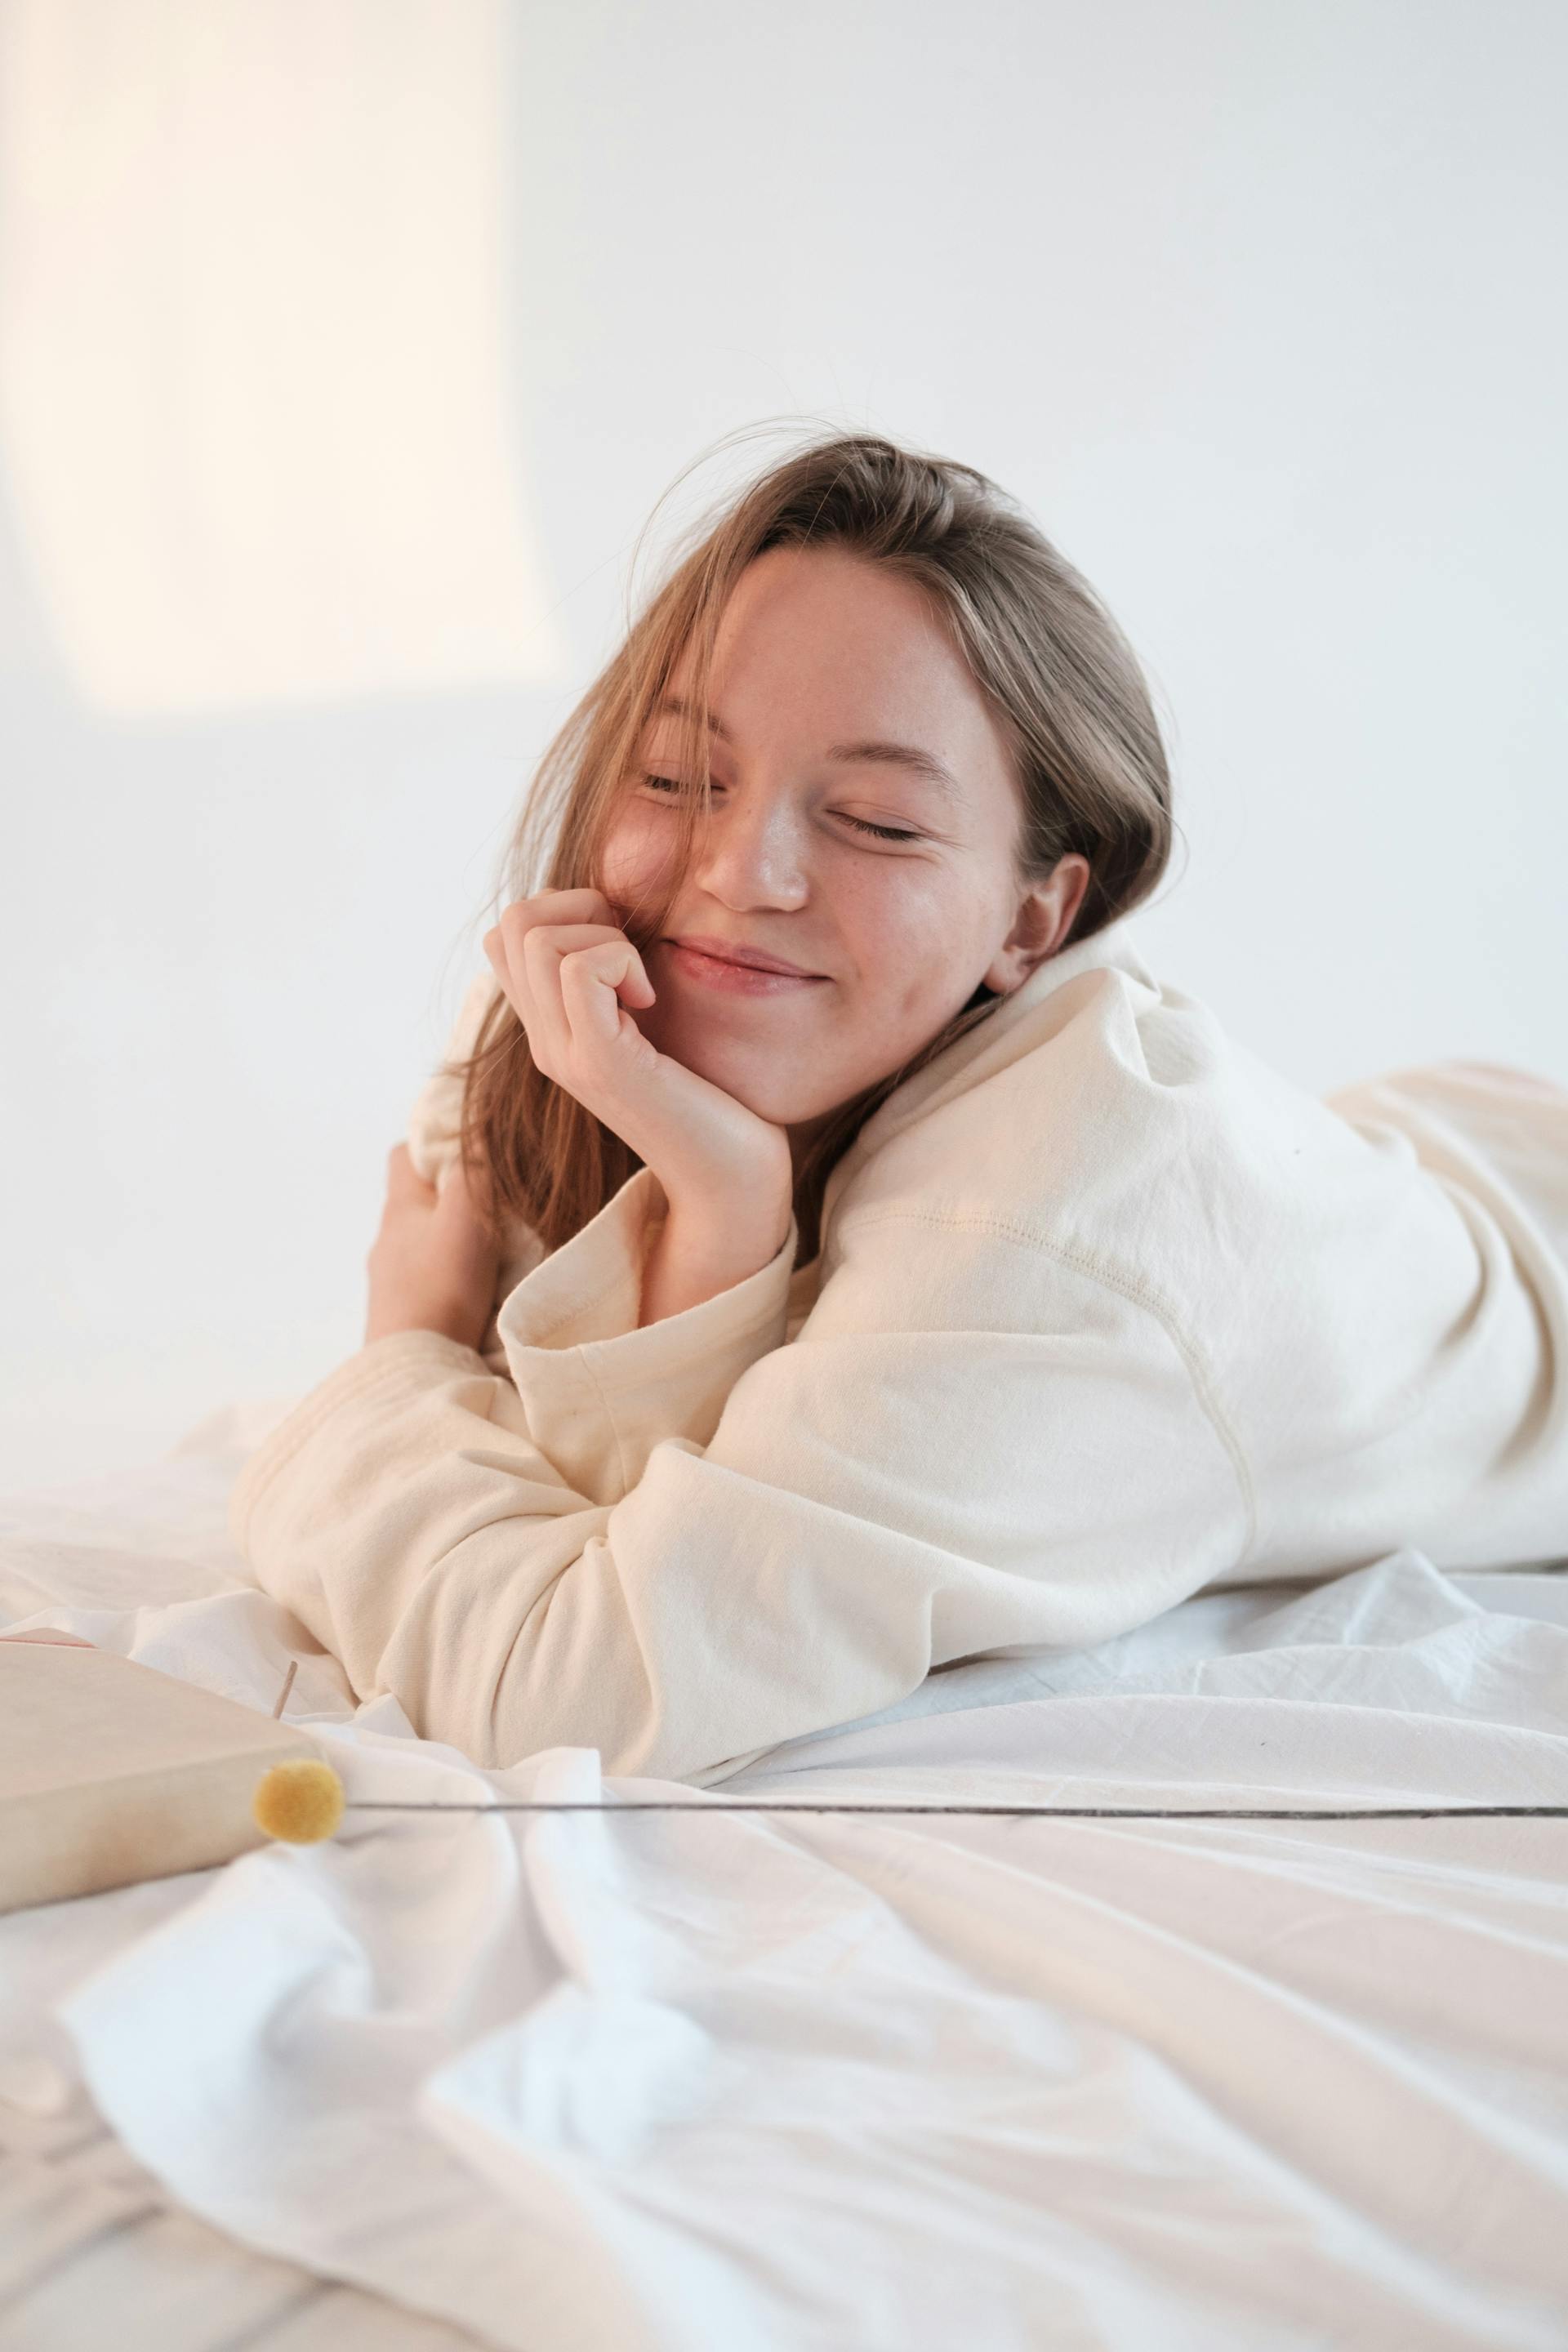 A smiling woman resting in bed with her eyes closed | Source: Pexels